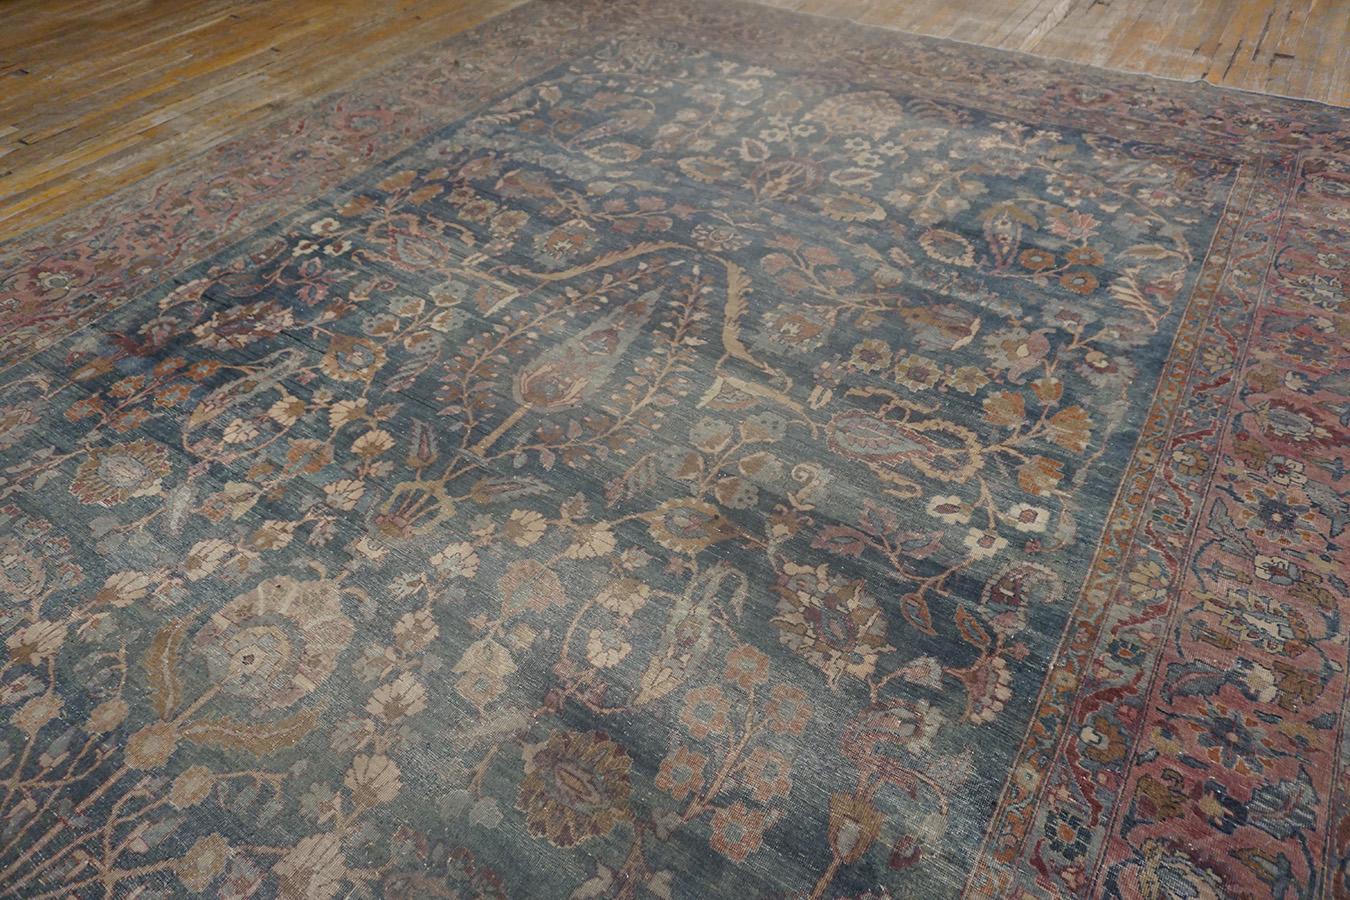 Hand-Knotted Early 20th Century N.E. Persian Khorassan Moud Carpet (10' x 18'4